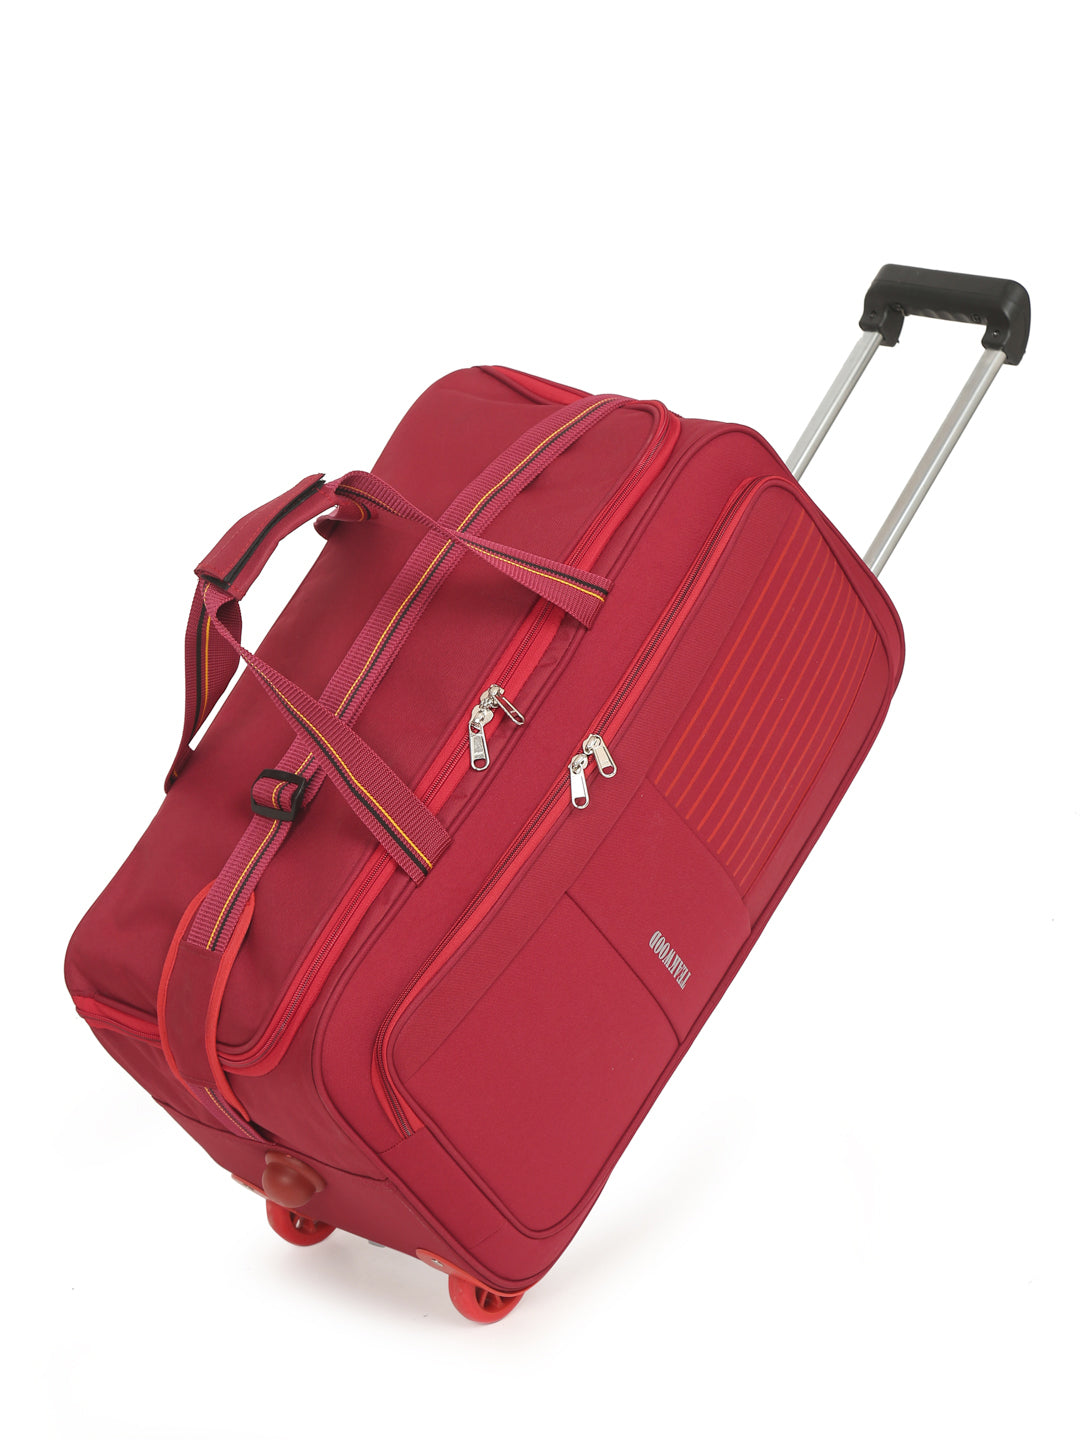 How to Choose the Best Anti-Theft Travel Bag for Your Next Trip - Happy  Travel